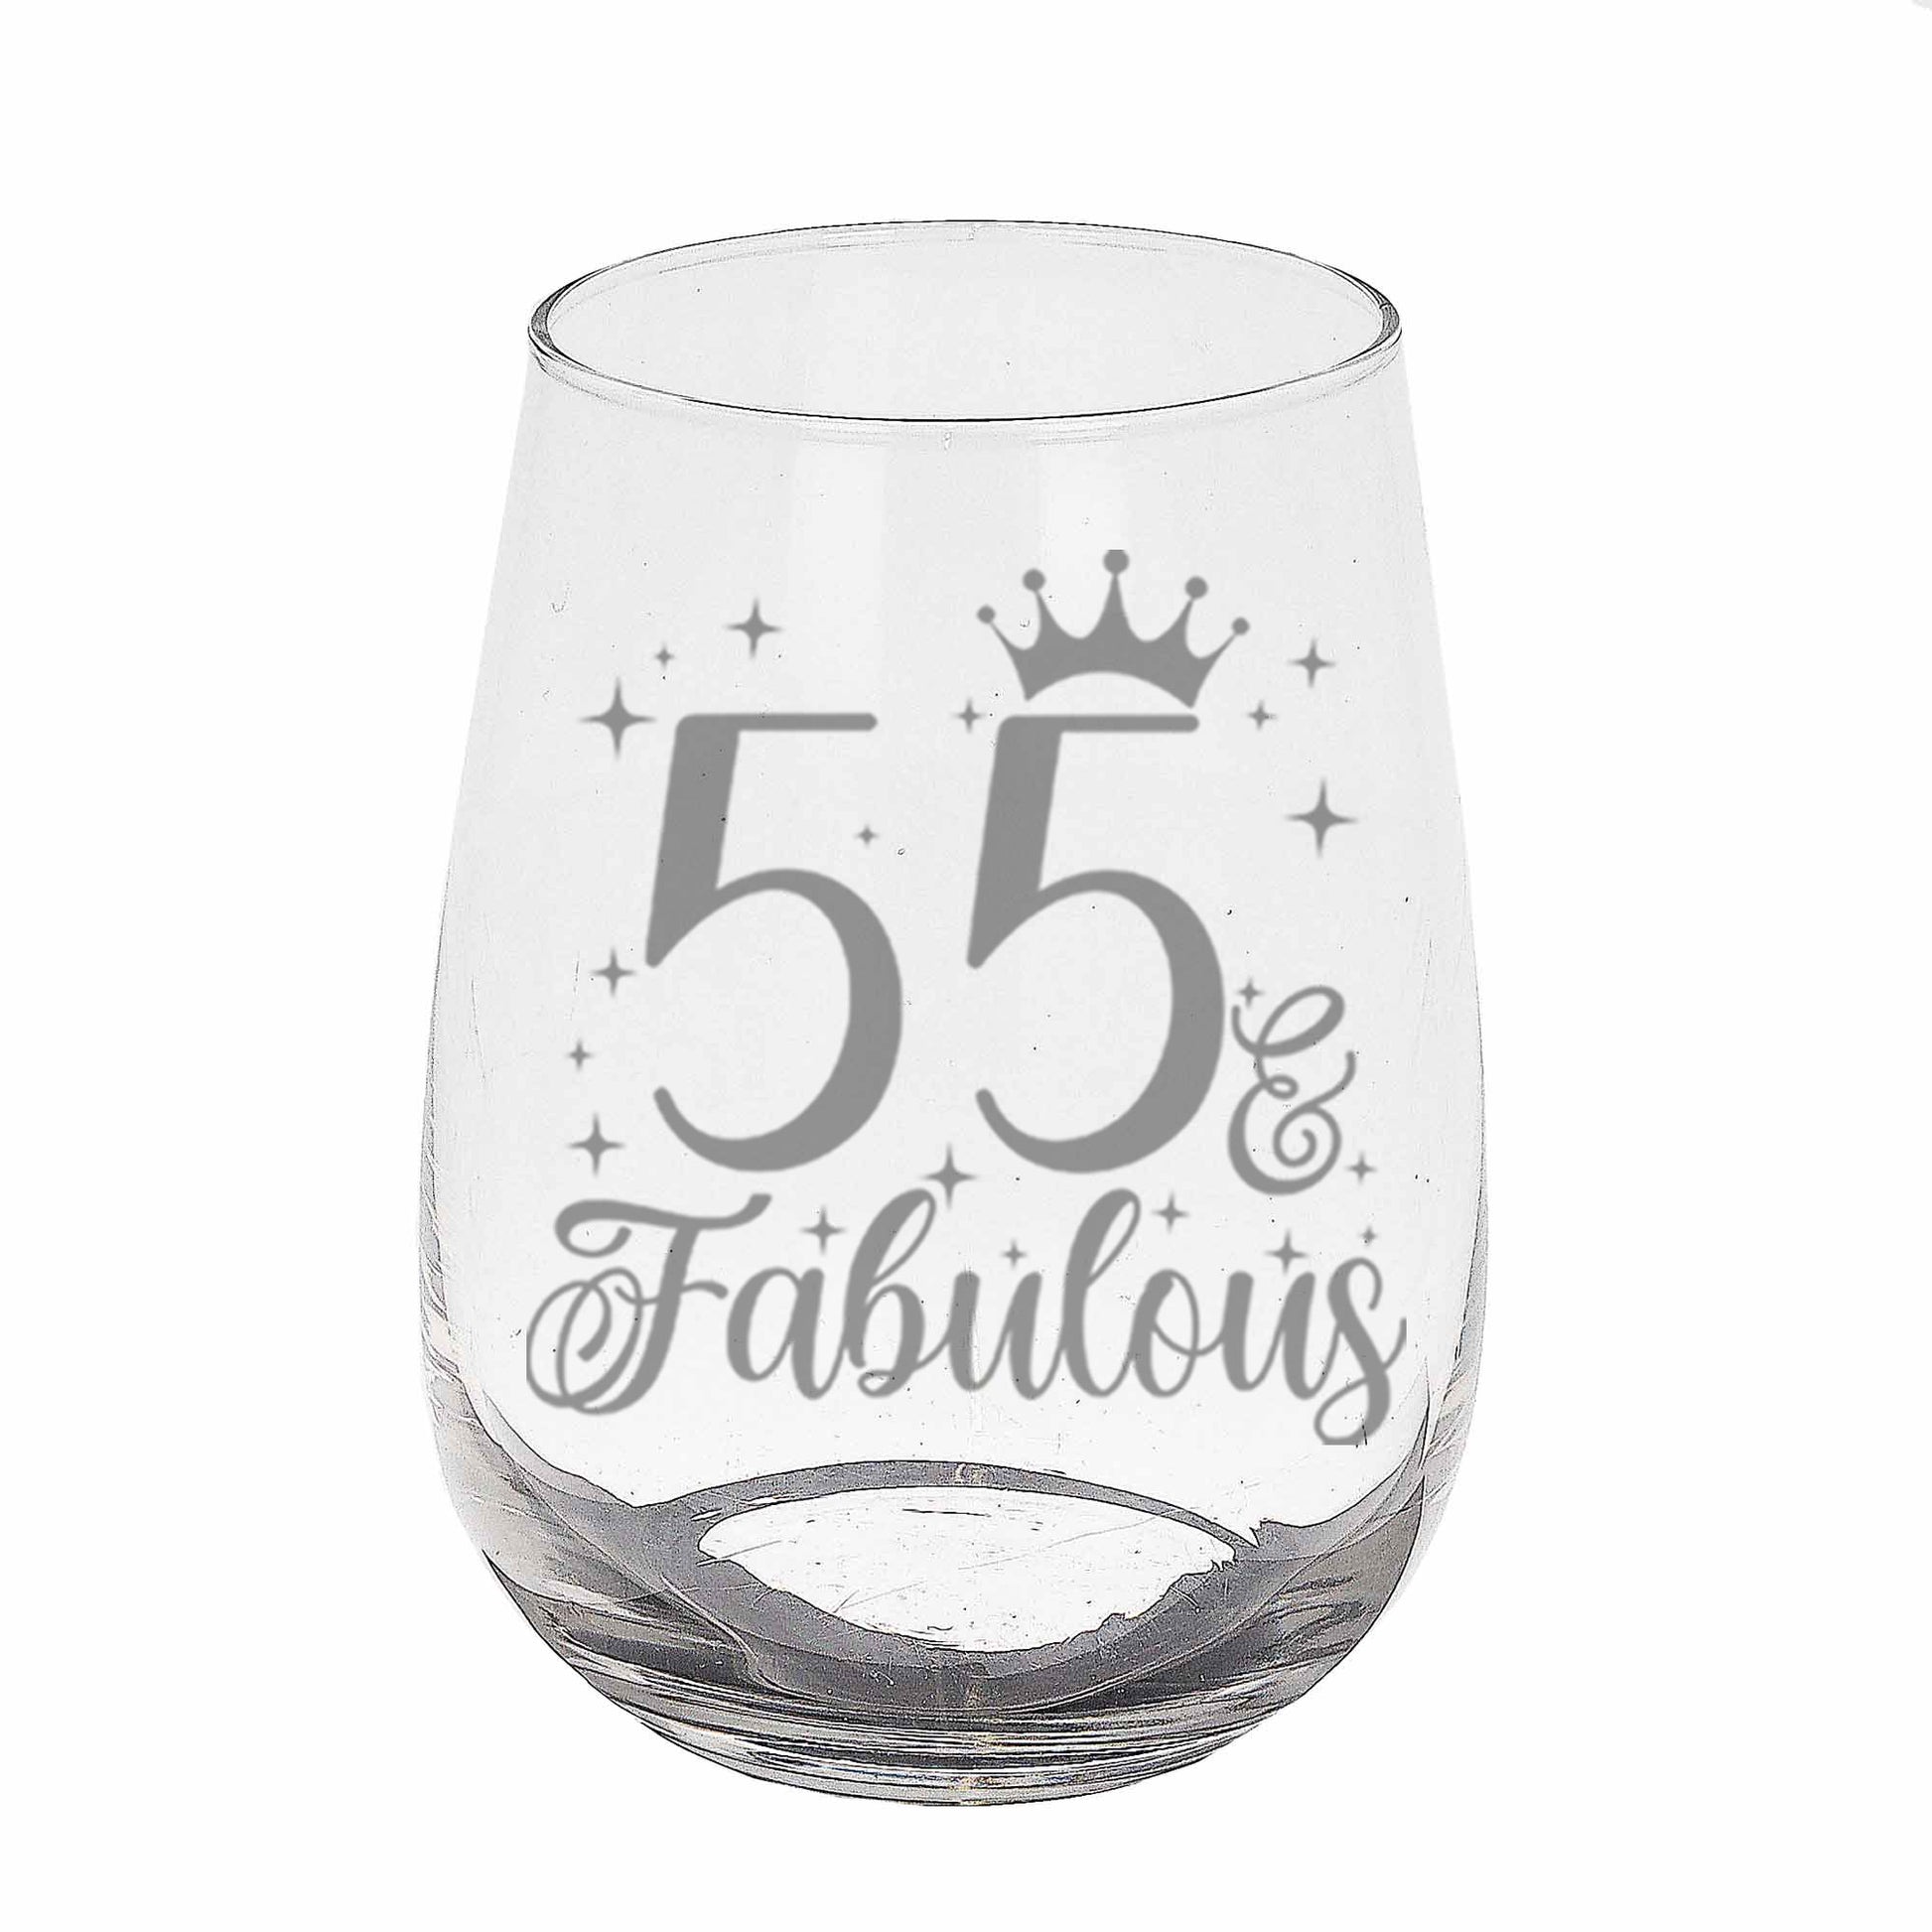 55 & Fabulous Engraved Stemless Gin Glass and/or Coaster Set  - Always Looking Good - Stemless Gin Glass On Its Own  